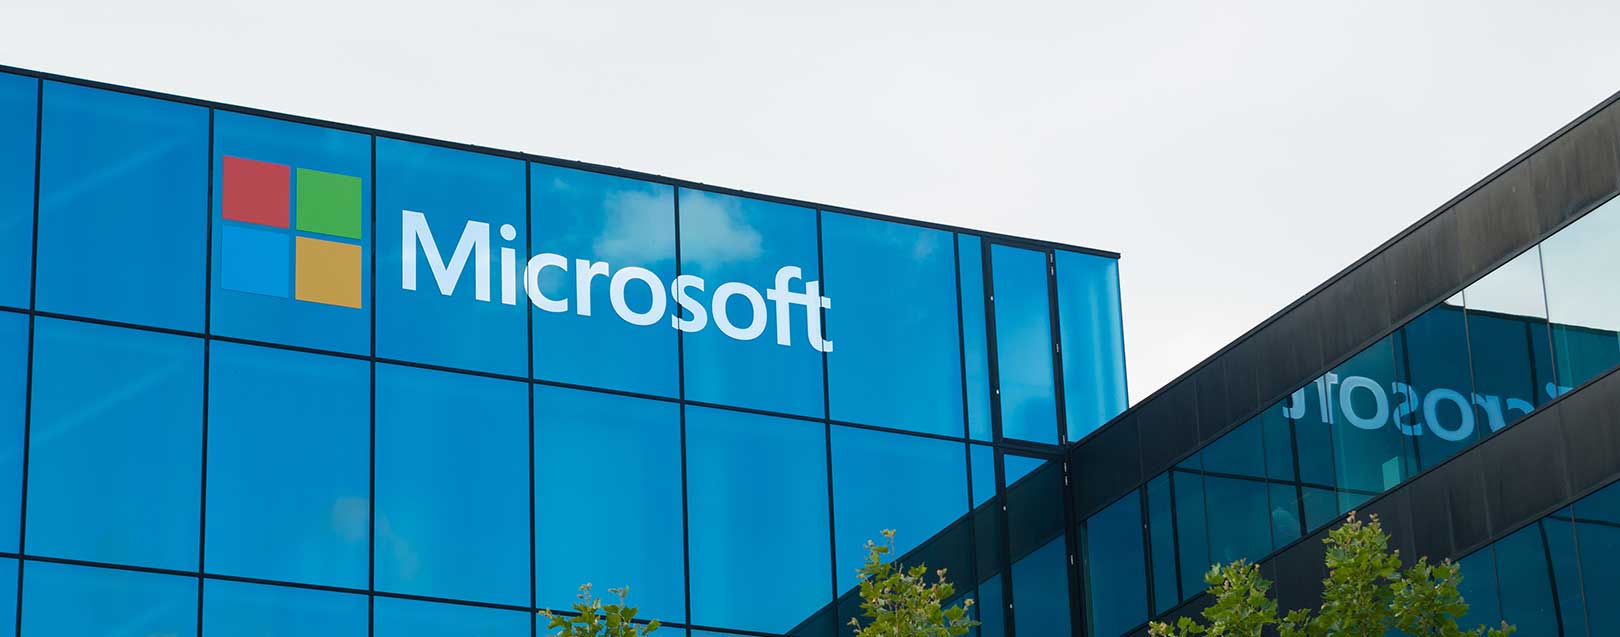 Jharkhand signs MoU with Microsoft to leverage the cloud technology